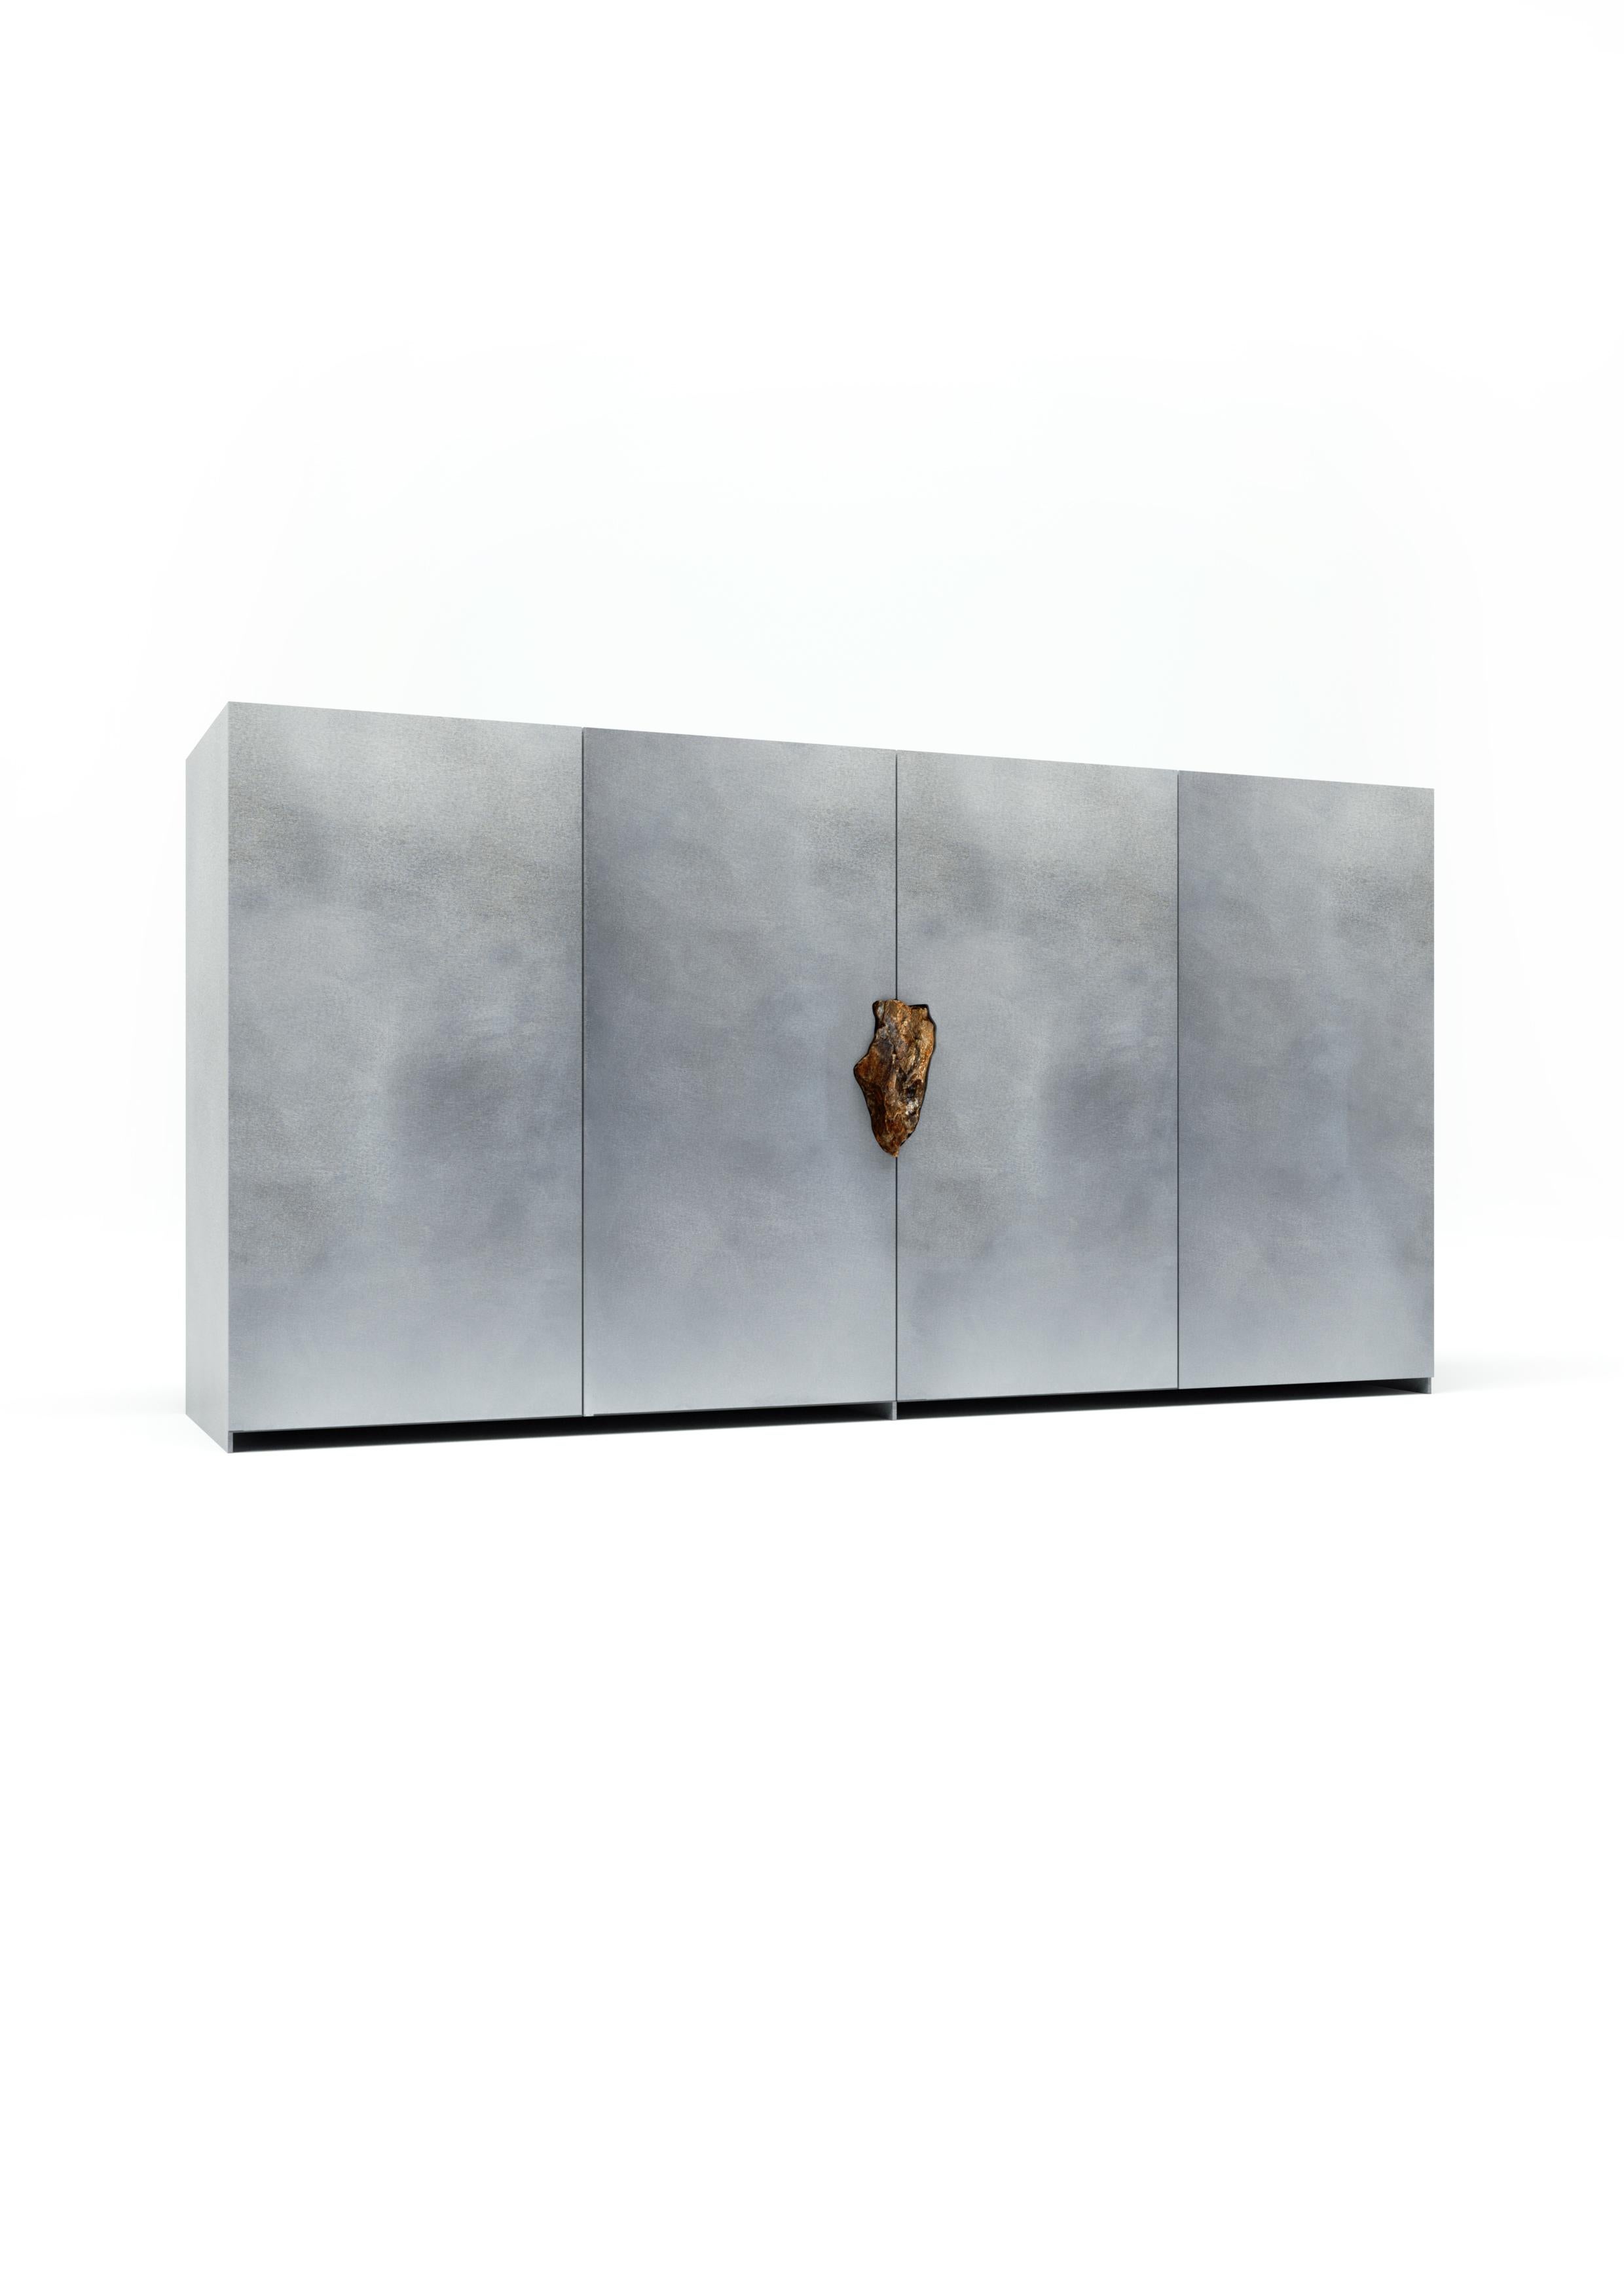 Hand-Crafted Oxidized and Waxed Aluminium Big Cabinet with Petrified Wood by Pierre De Valck For Sale